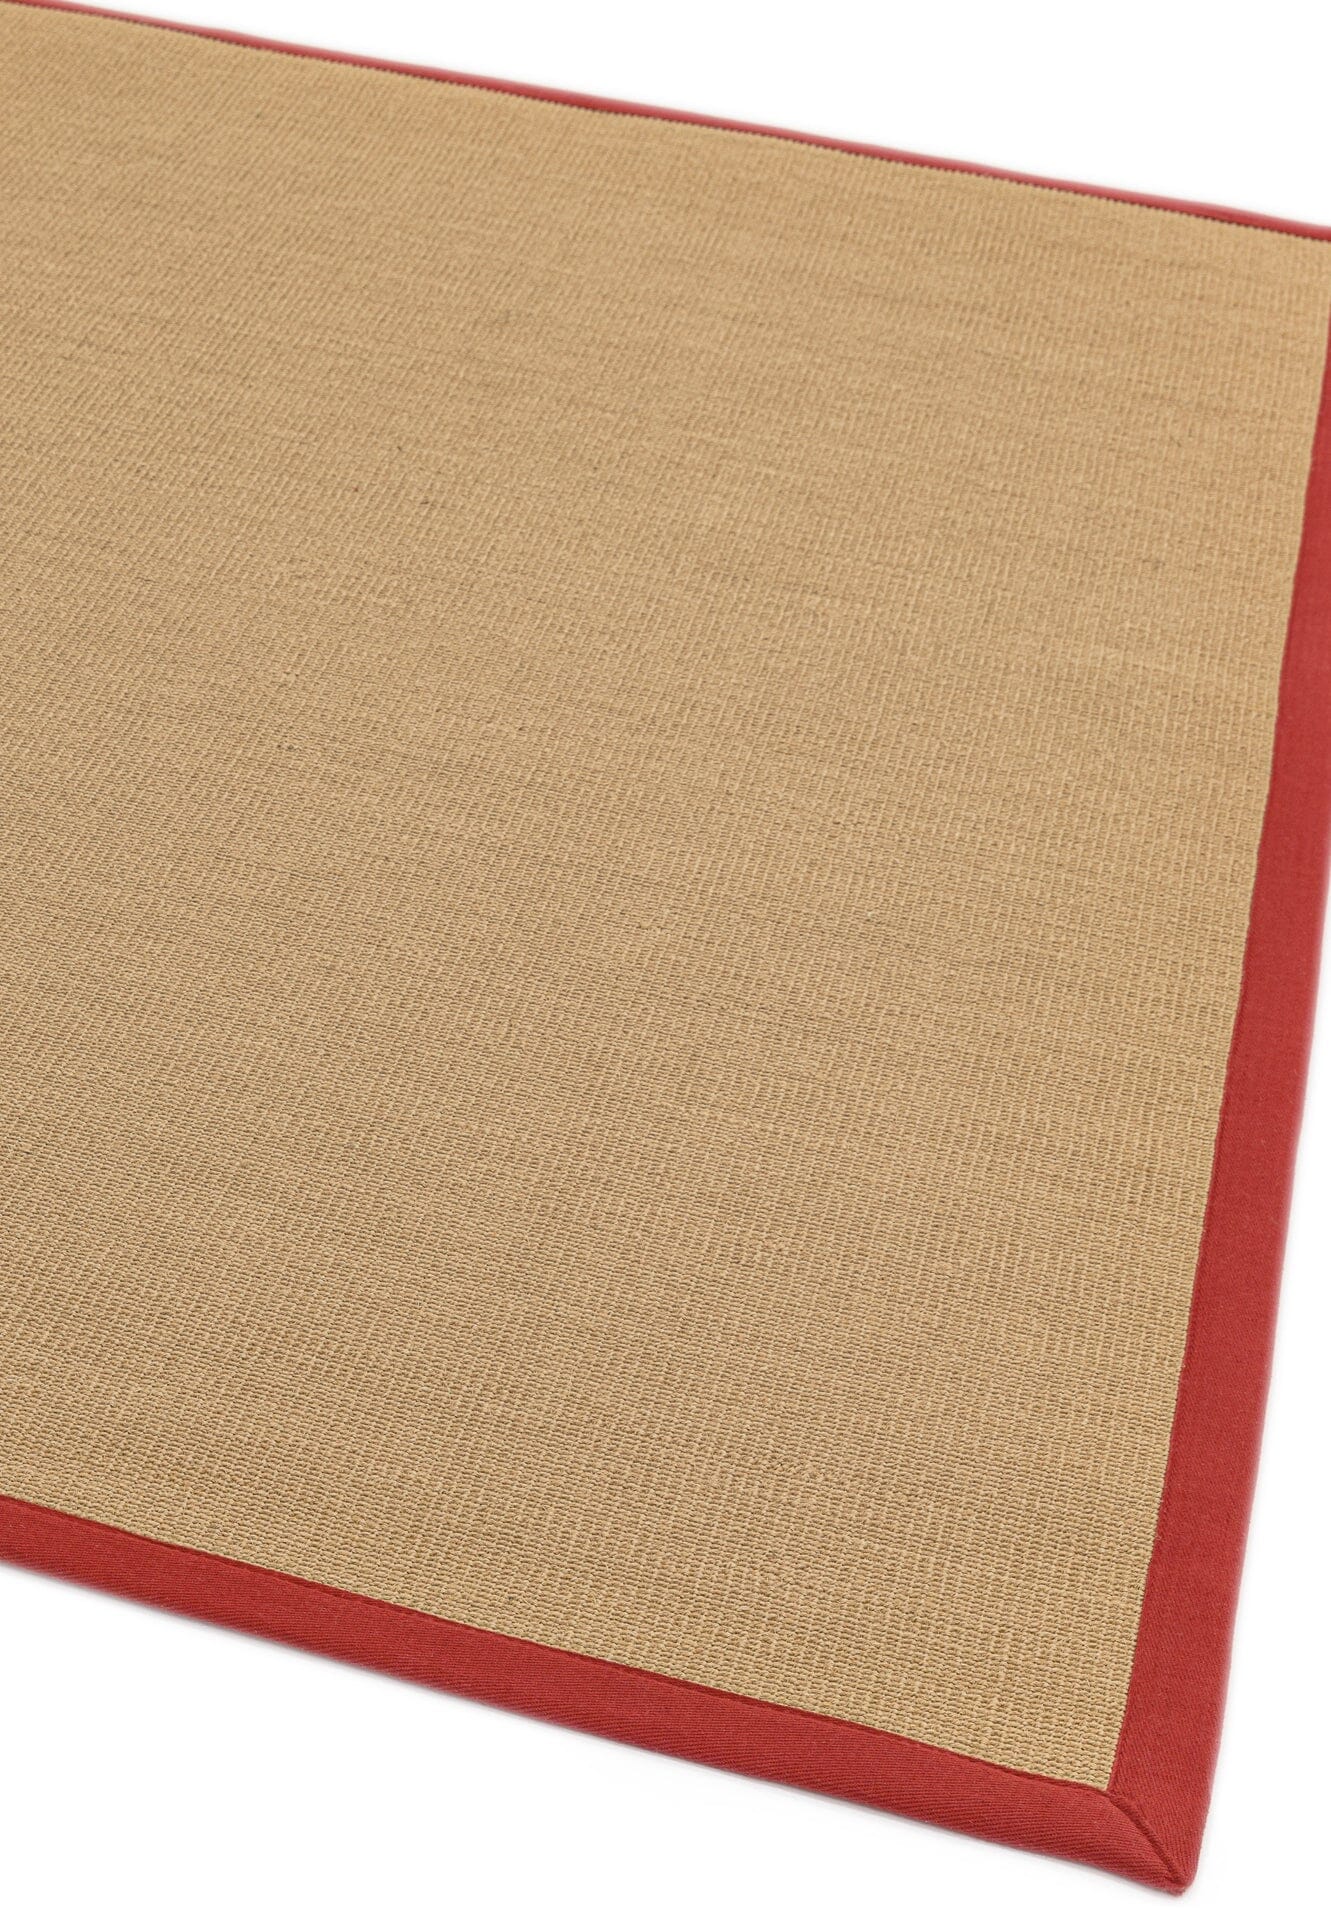  Asiatic Carpets-Asiatic Carpets Sisal Machine Woven Rug Linen/Red - 120 x 180cm-Beige, Natural 805 